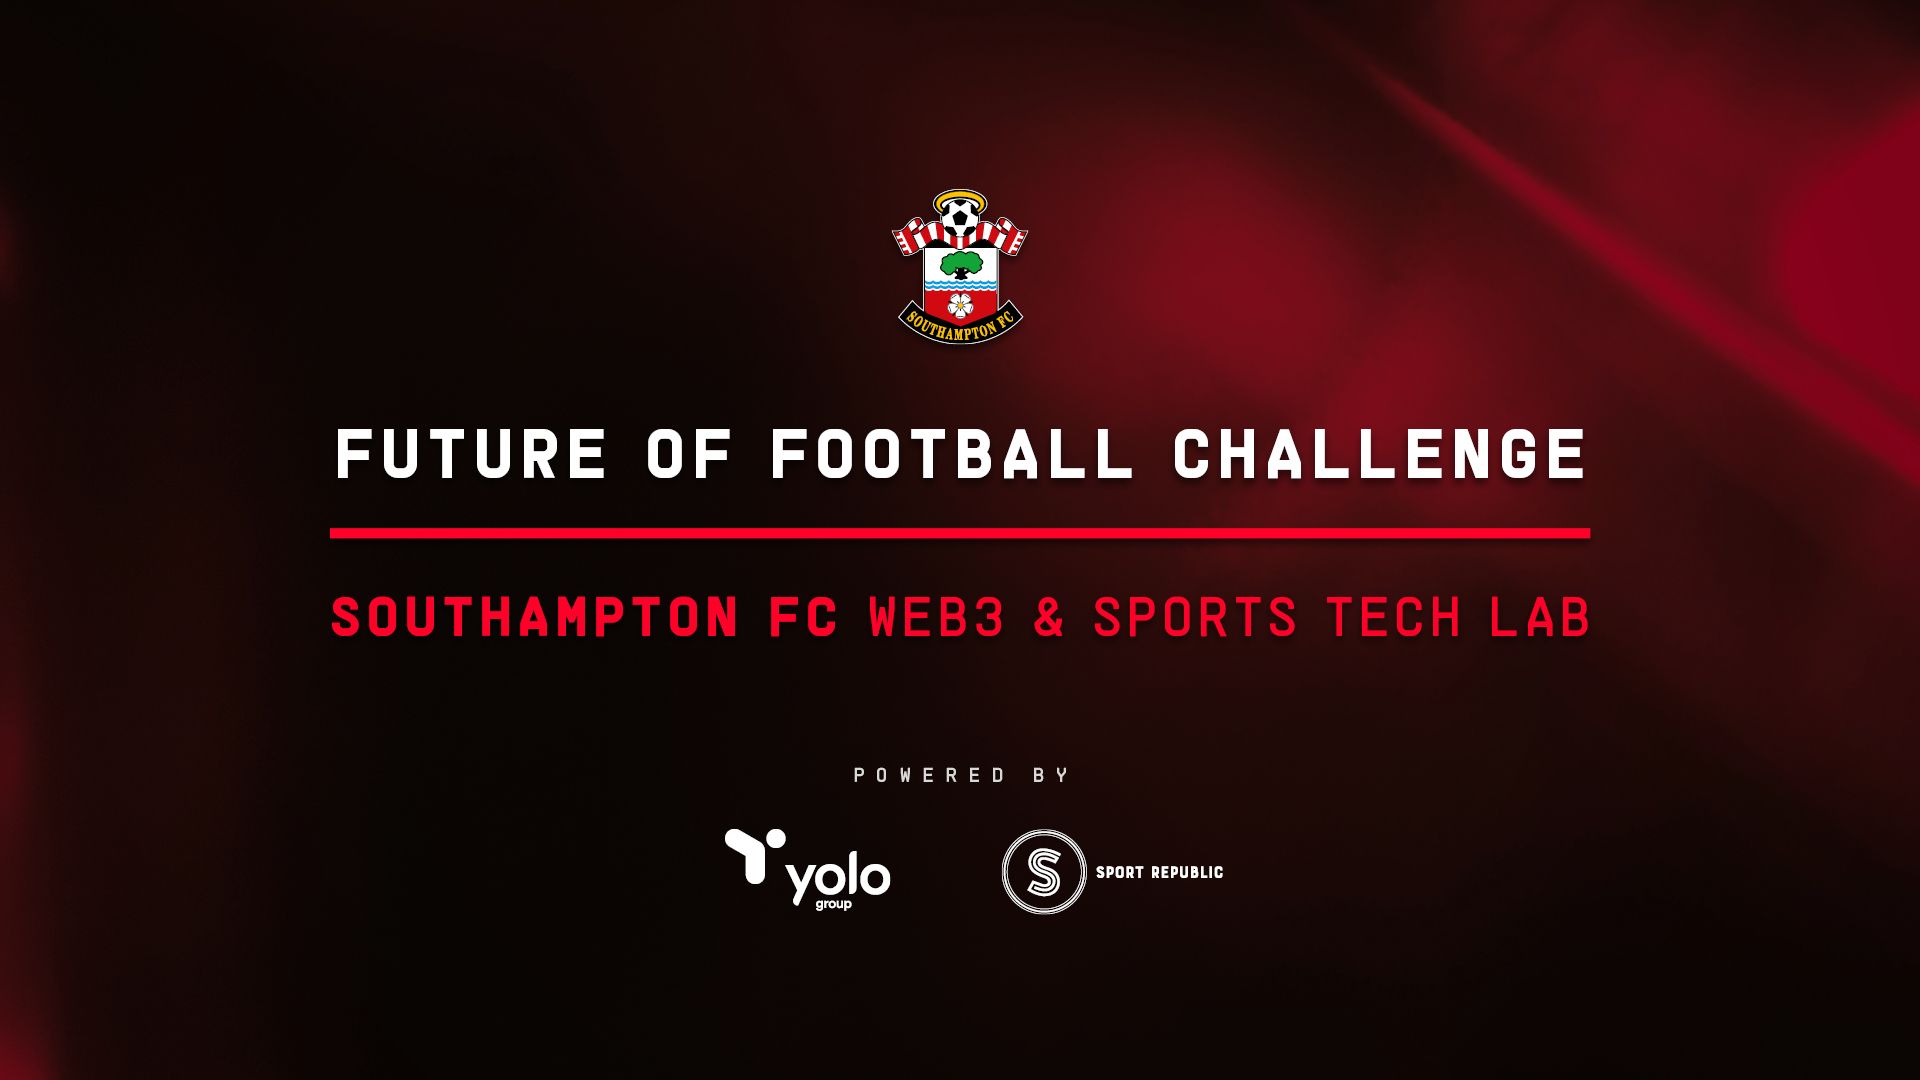 Southampton FC scouting sports tech startups for Future of Football challenge